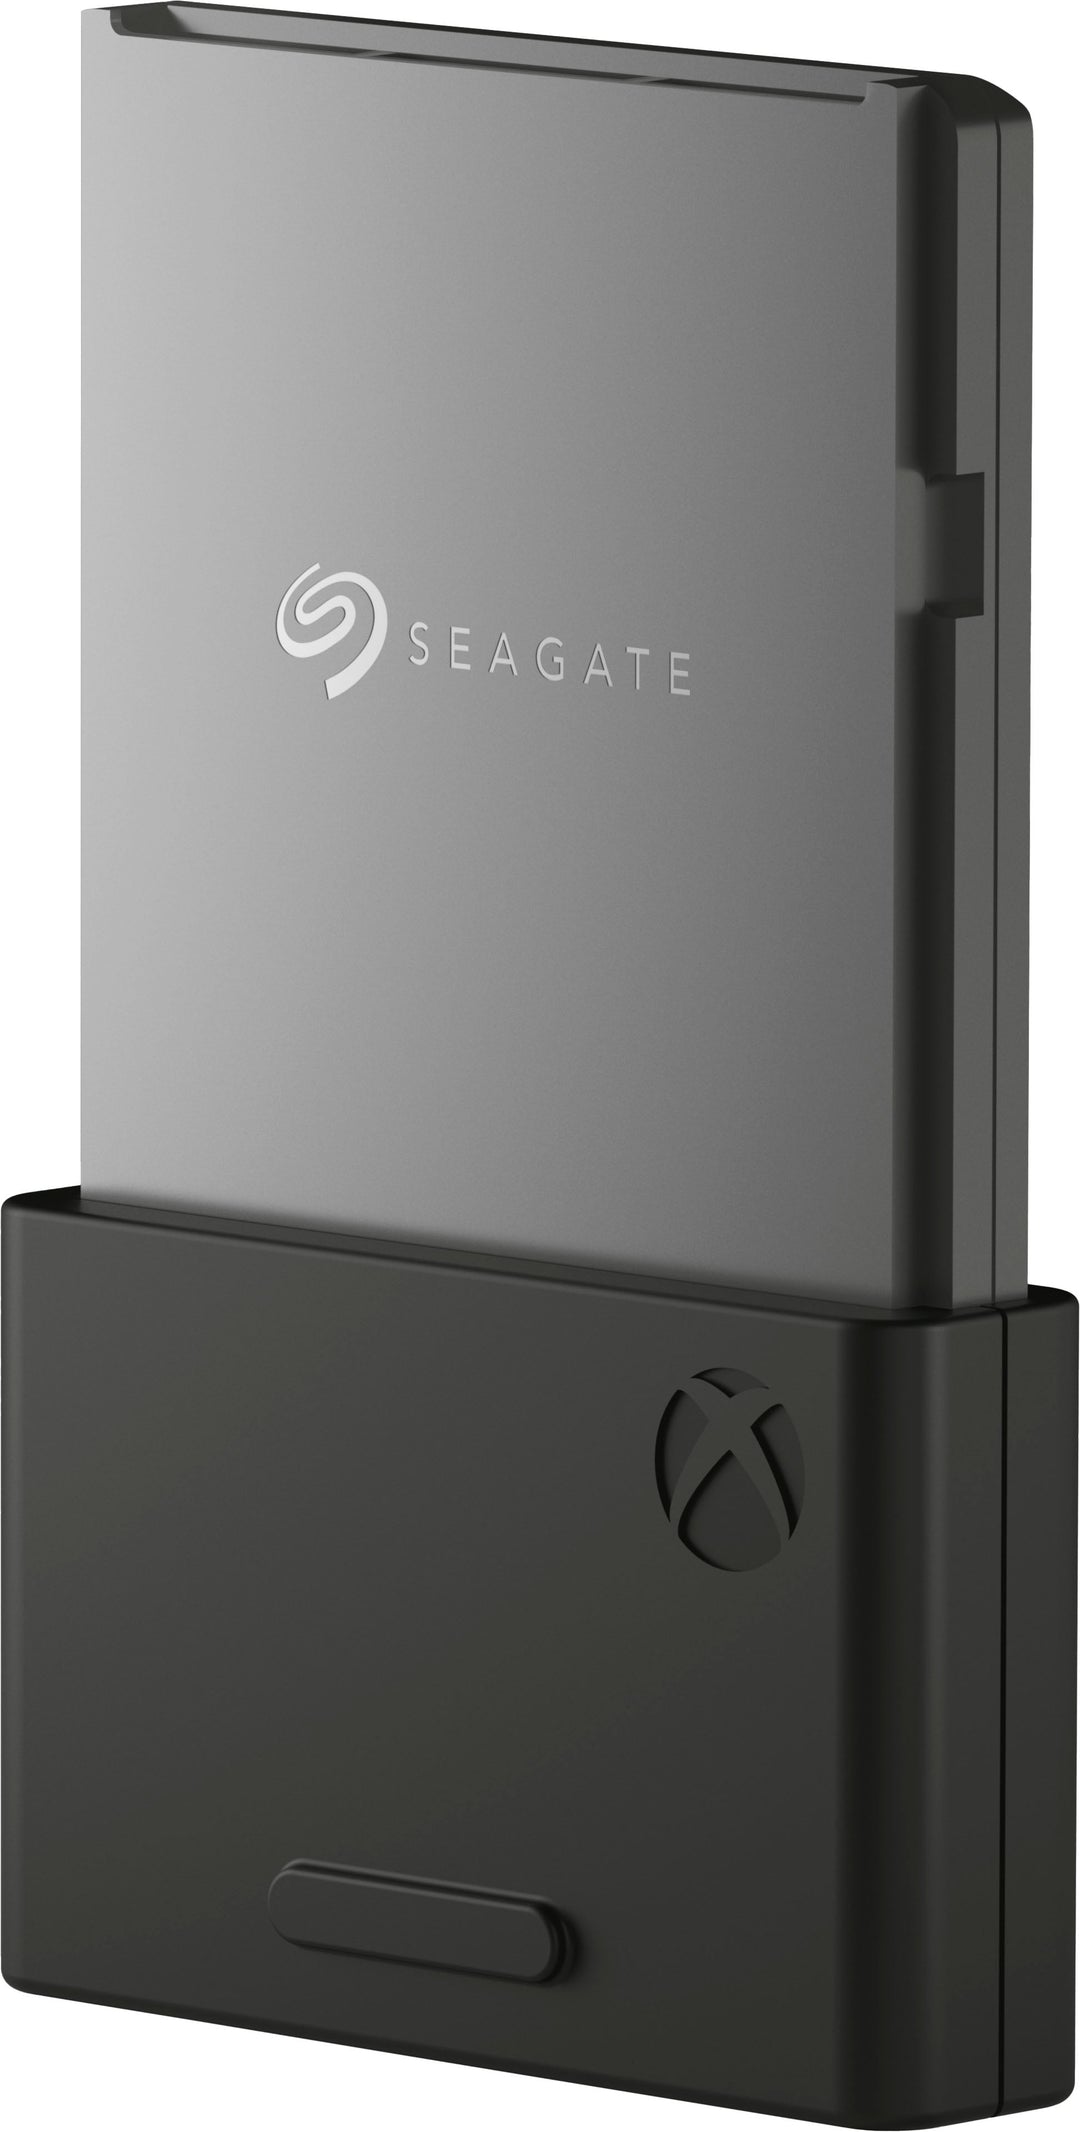 Seagate - 2TB Storage Expansion Card for Xbox Series X|S Internal NVMe SSD - Black_6